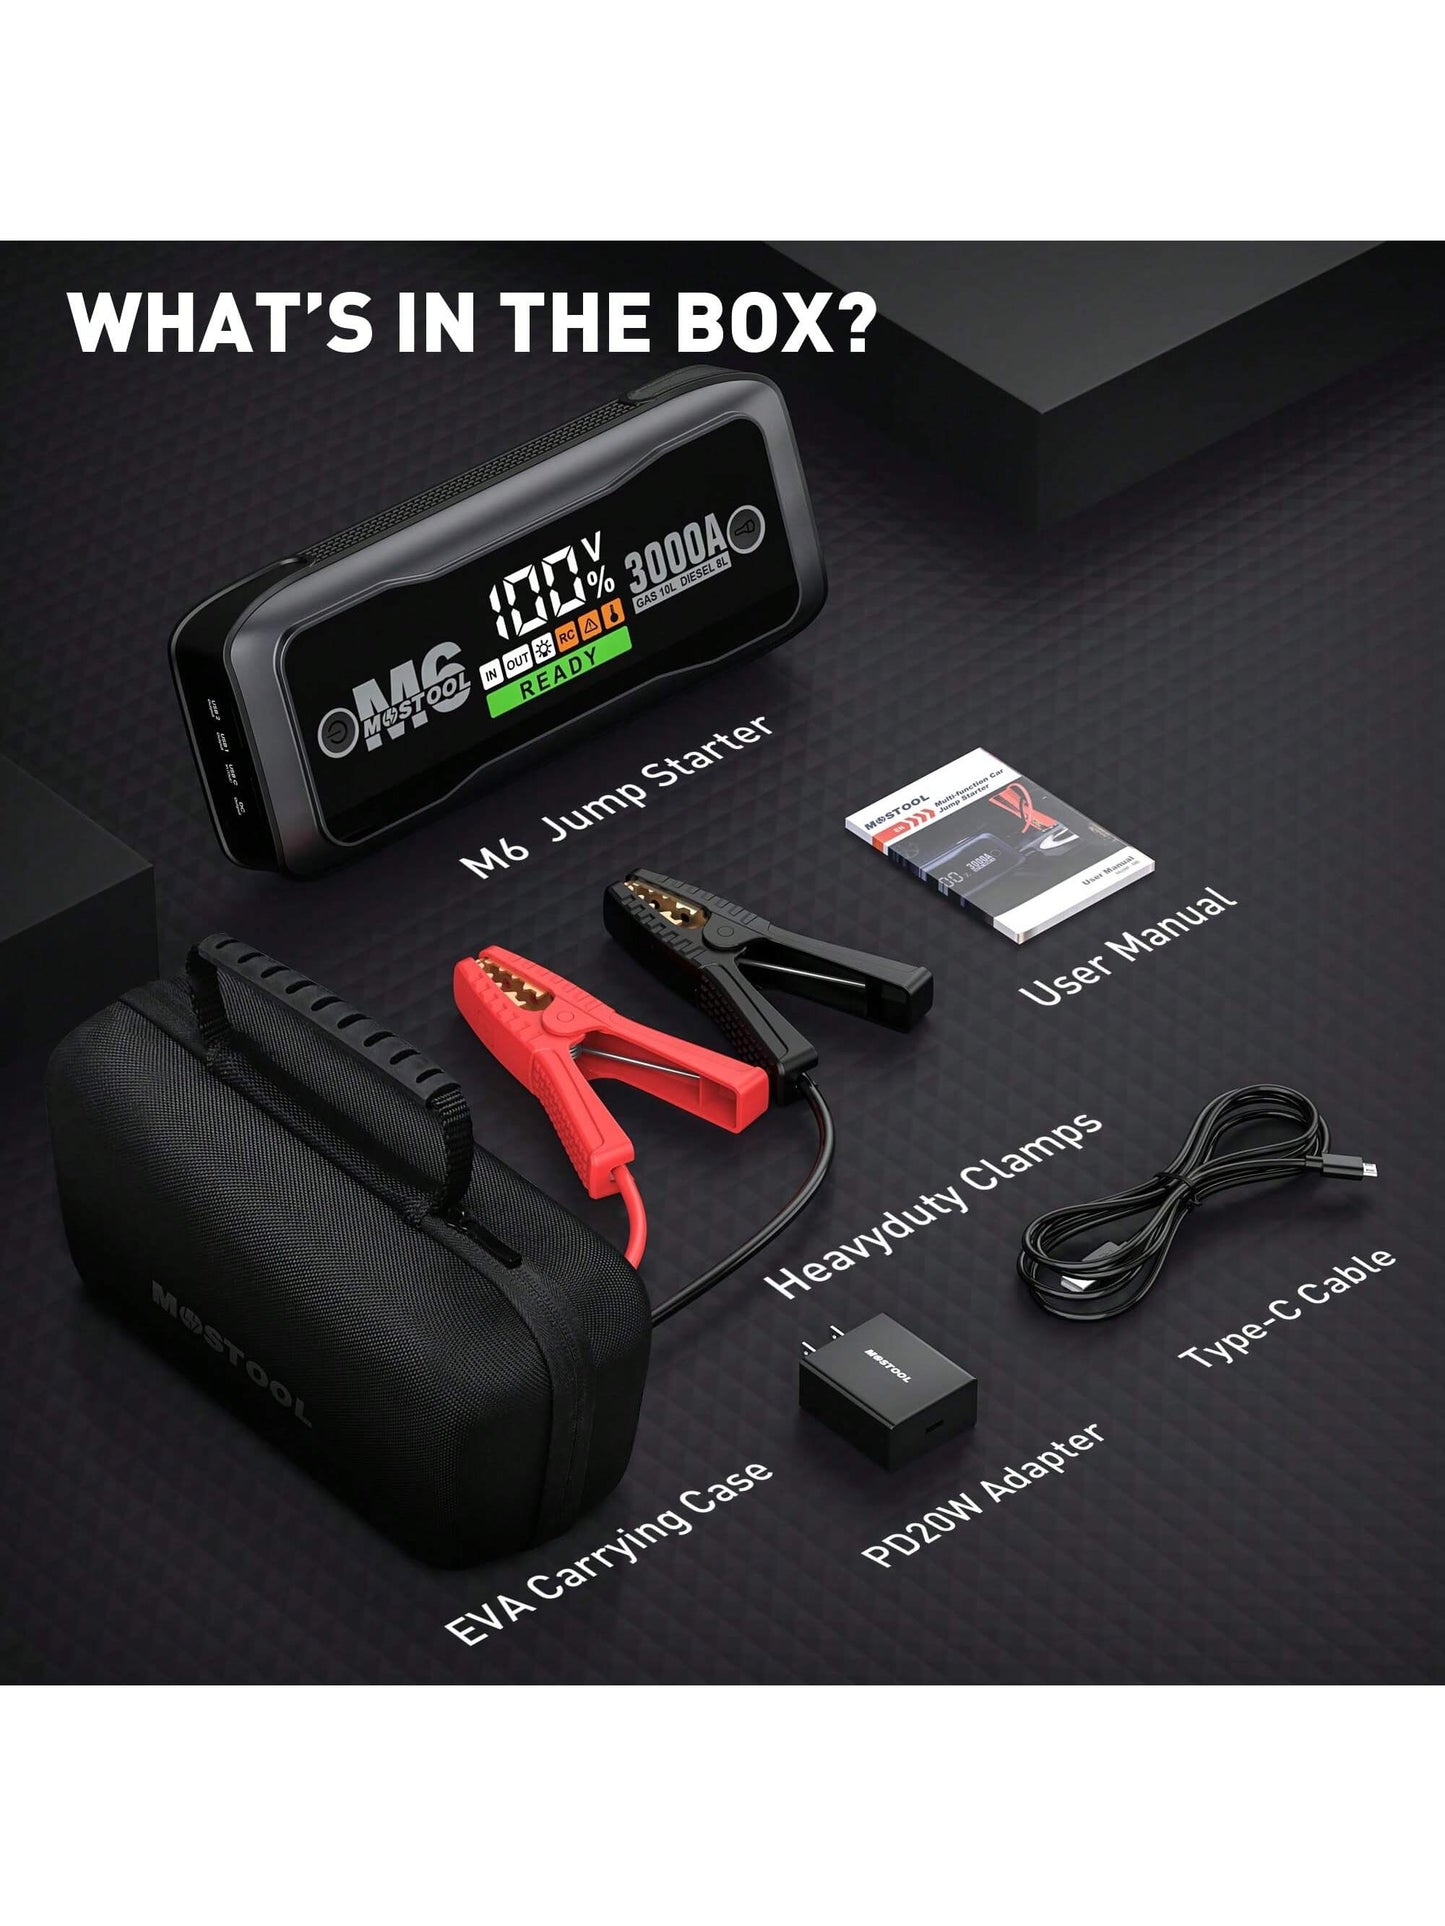 Jump Starter Battery Pack - 3000A Peak, 20000mAh Capacity - Portable Jumper Box, 12V Car Battery Charger & Jumper Cables,10.0L Gas & 8.0L Diesel Engines